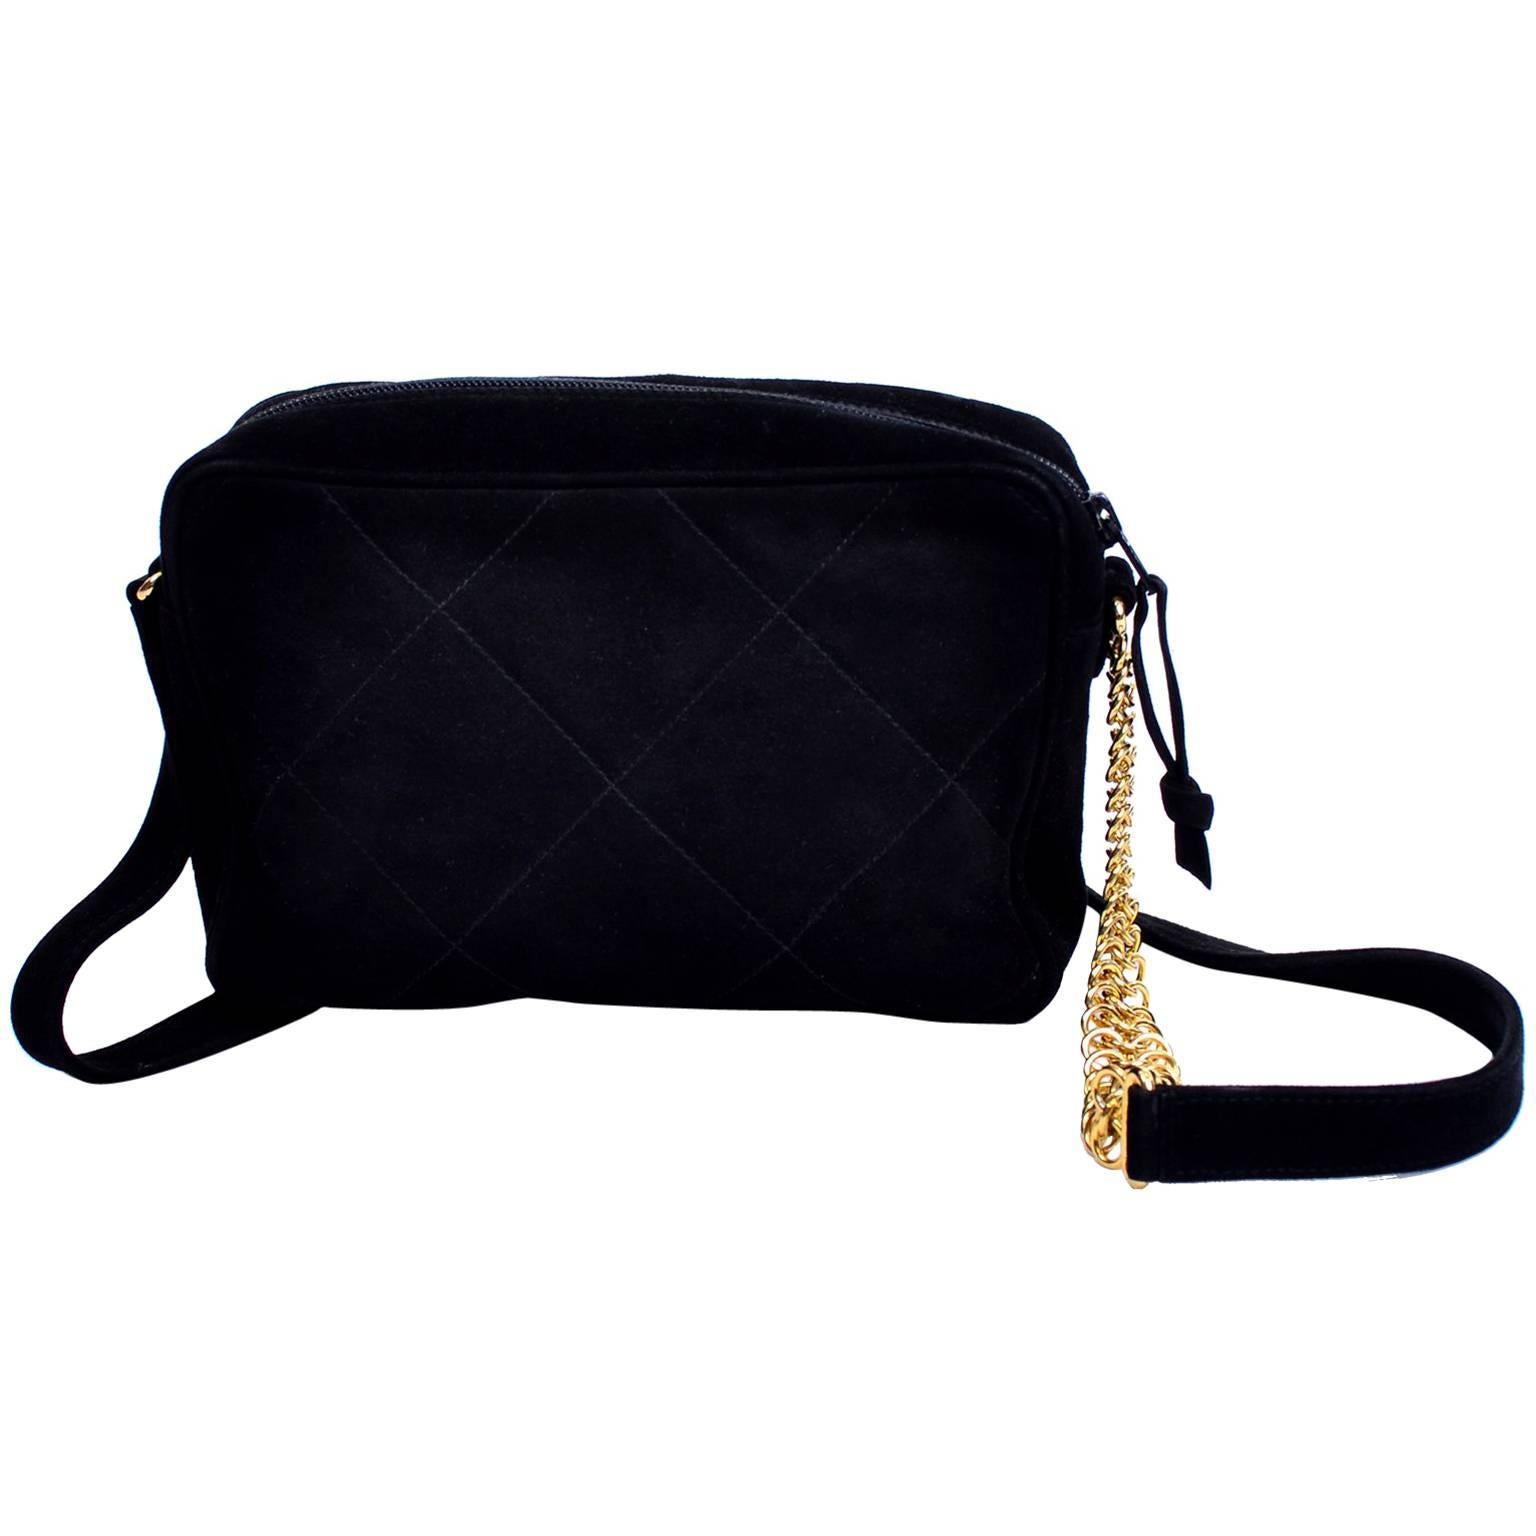 Aquascutum Black Suede Quilted Crossbody Handbag with Gold Chain Link ...